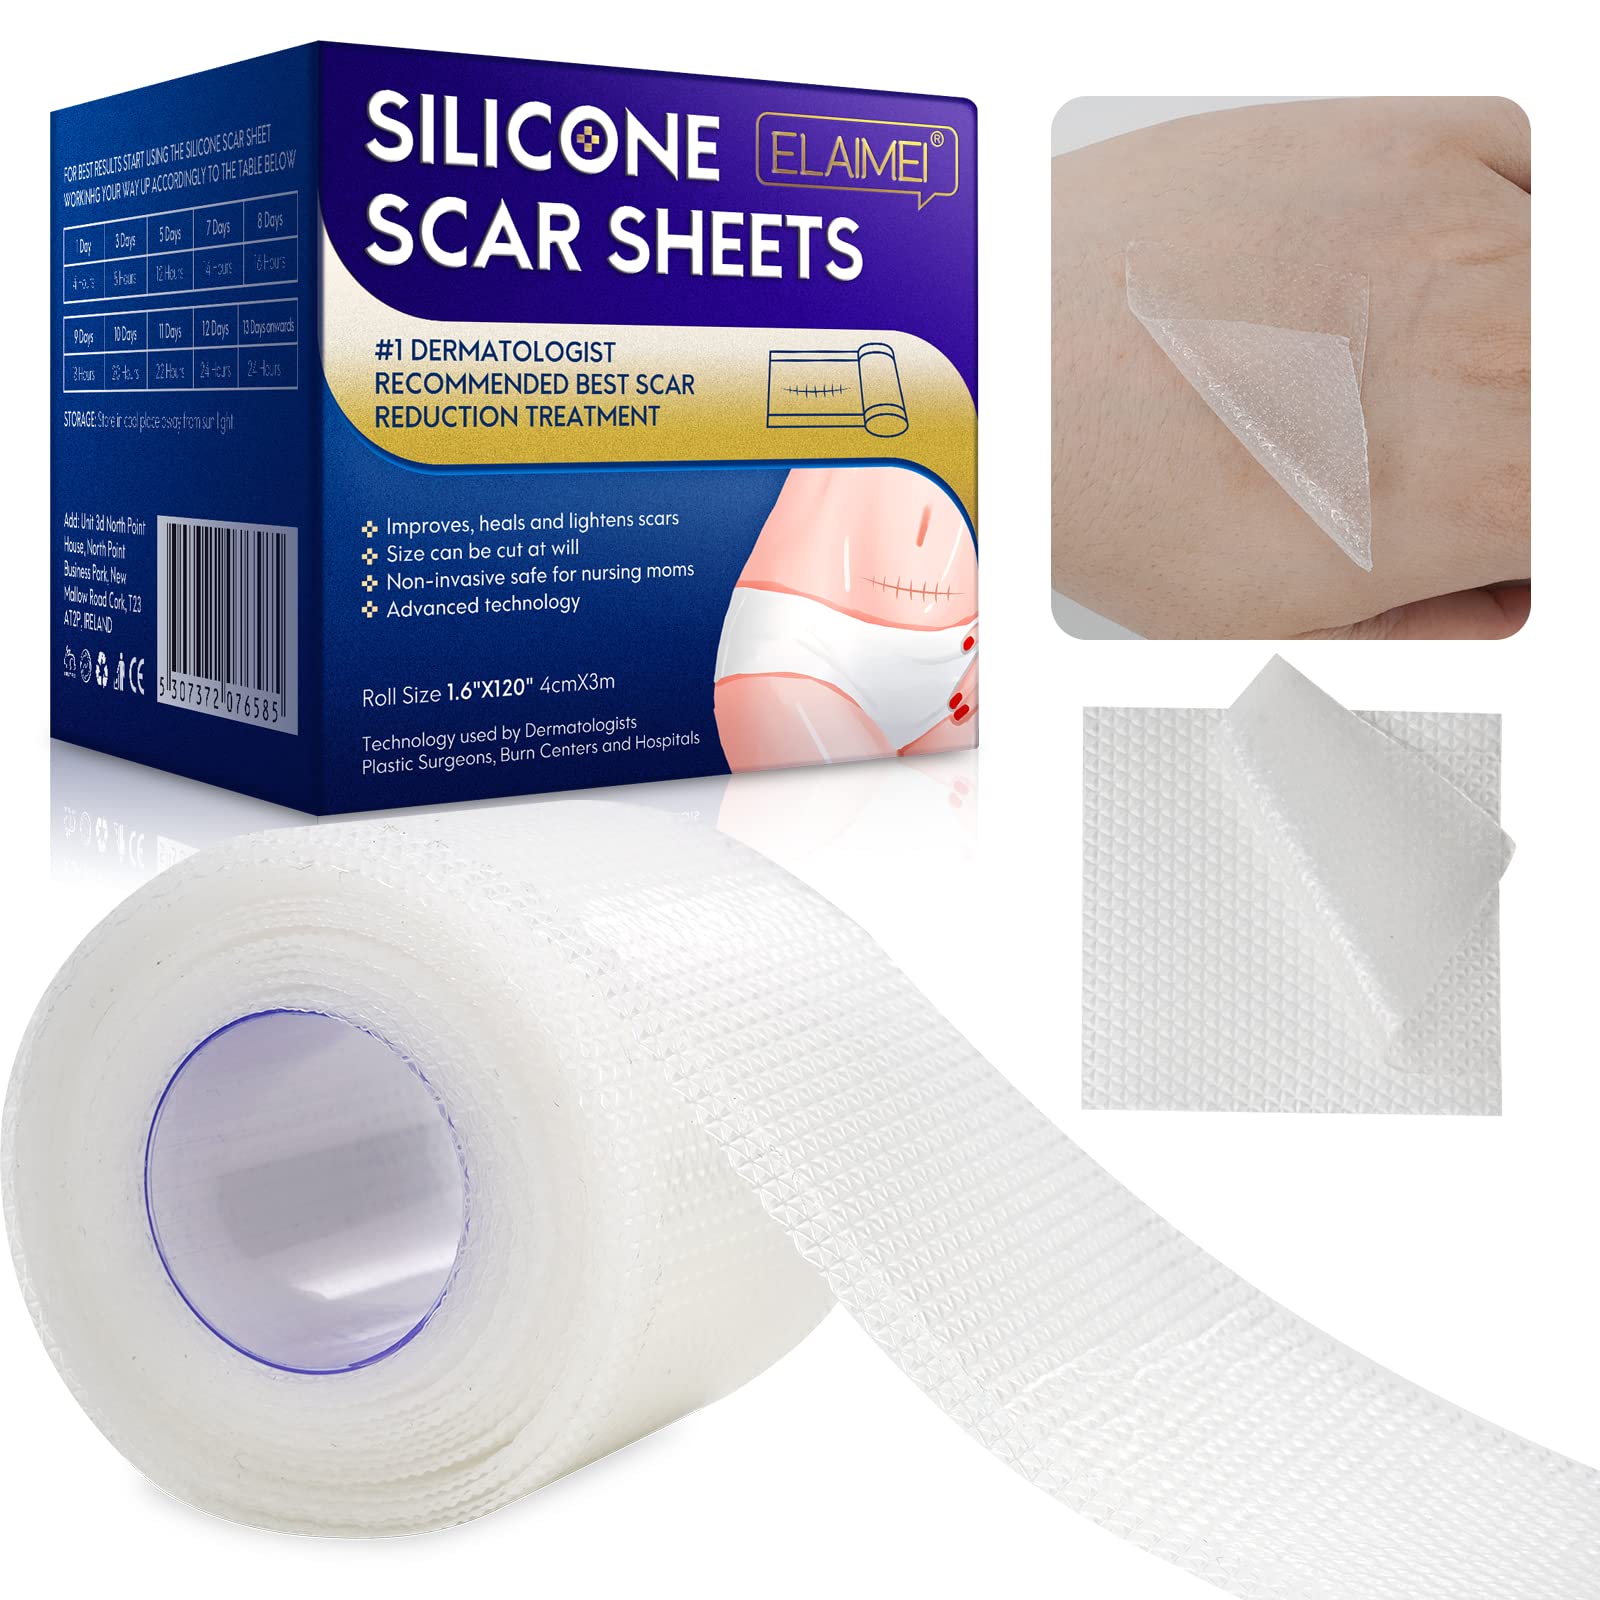 Soft Silicone Surgical Tapes